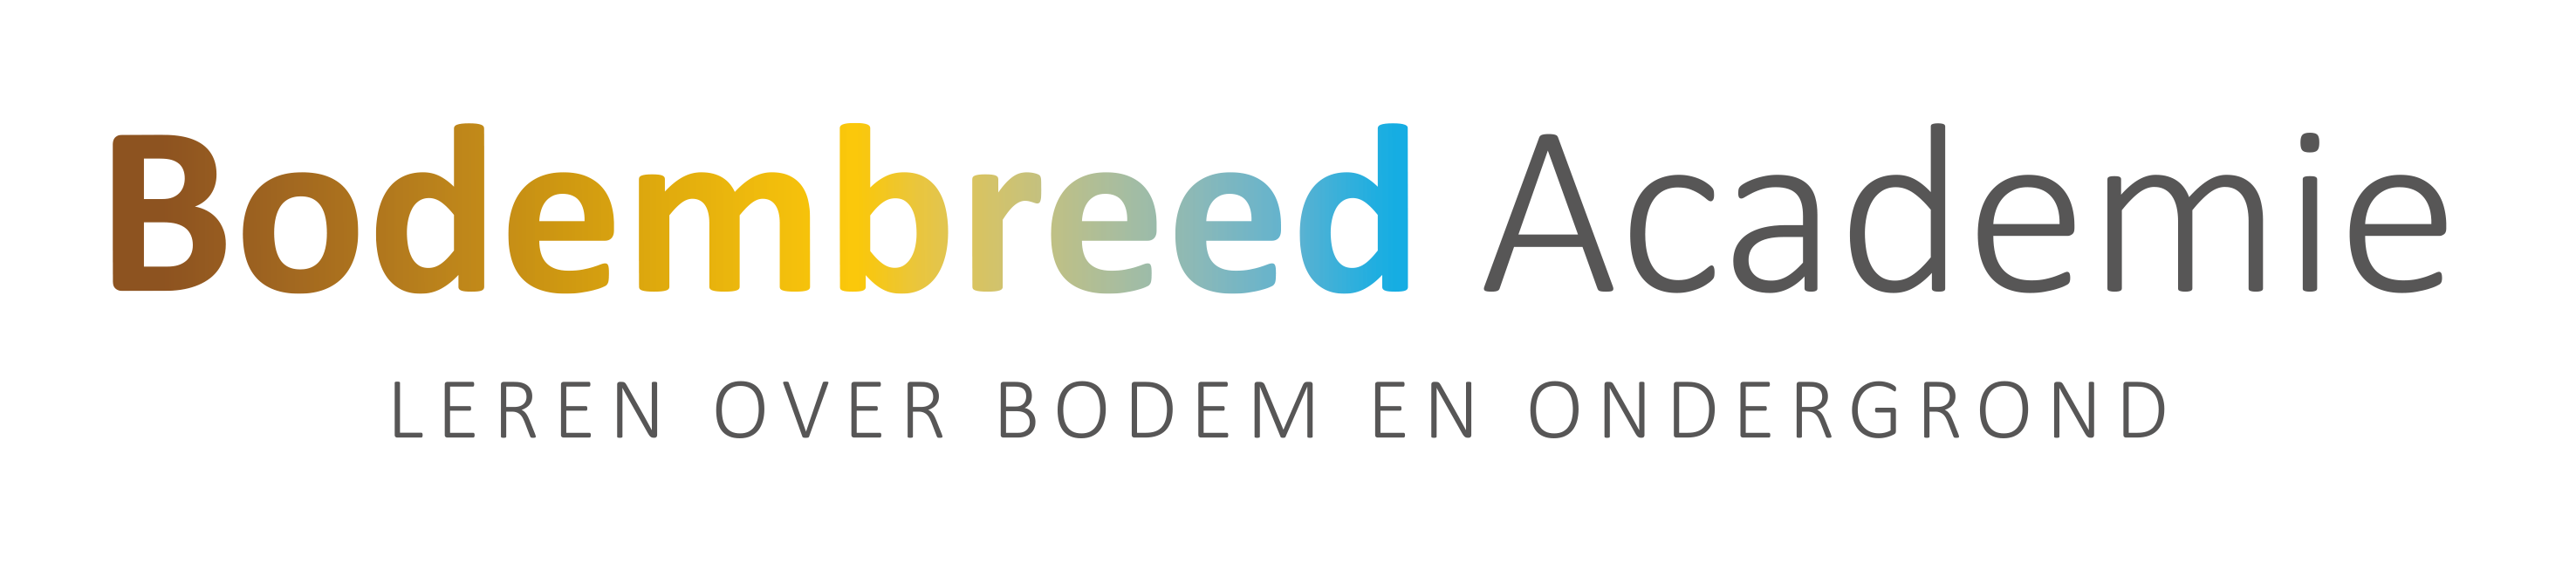 Bodembreed Academie transparant